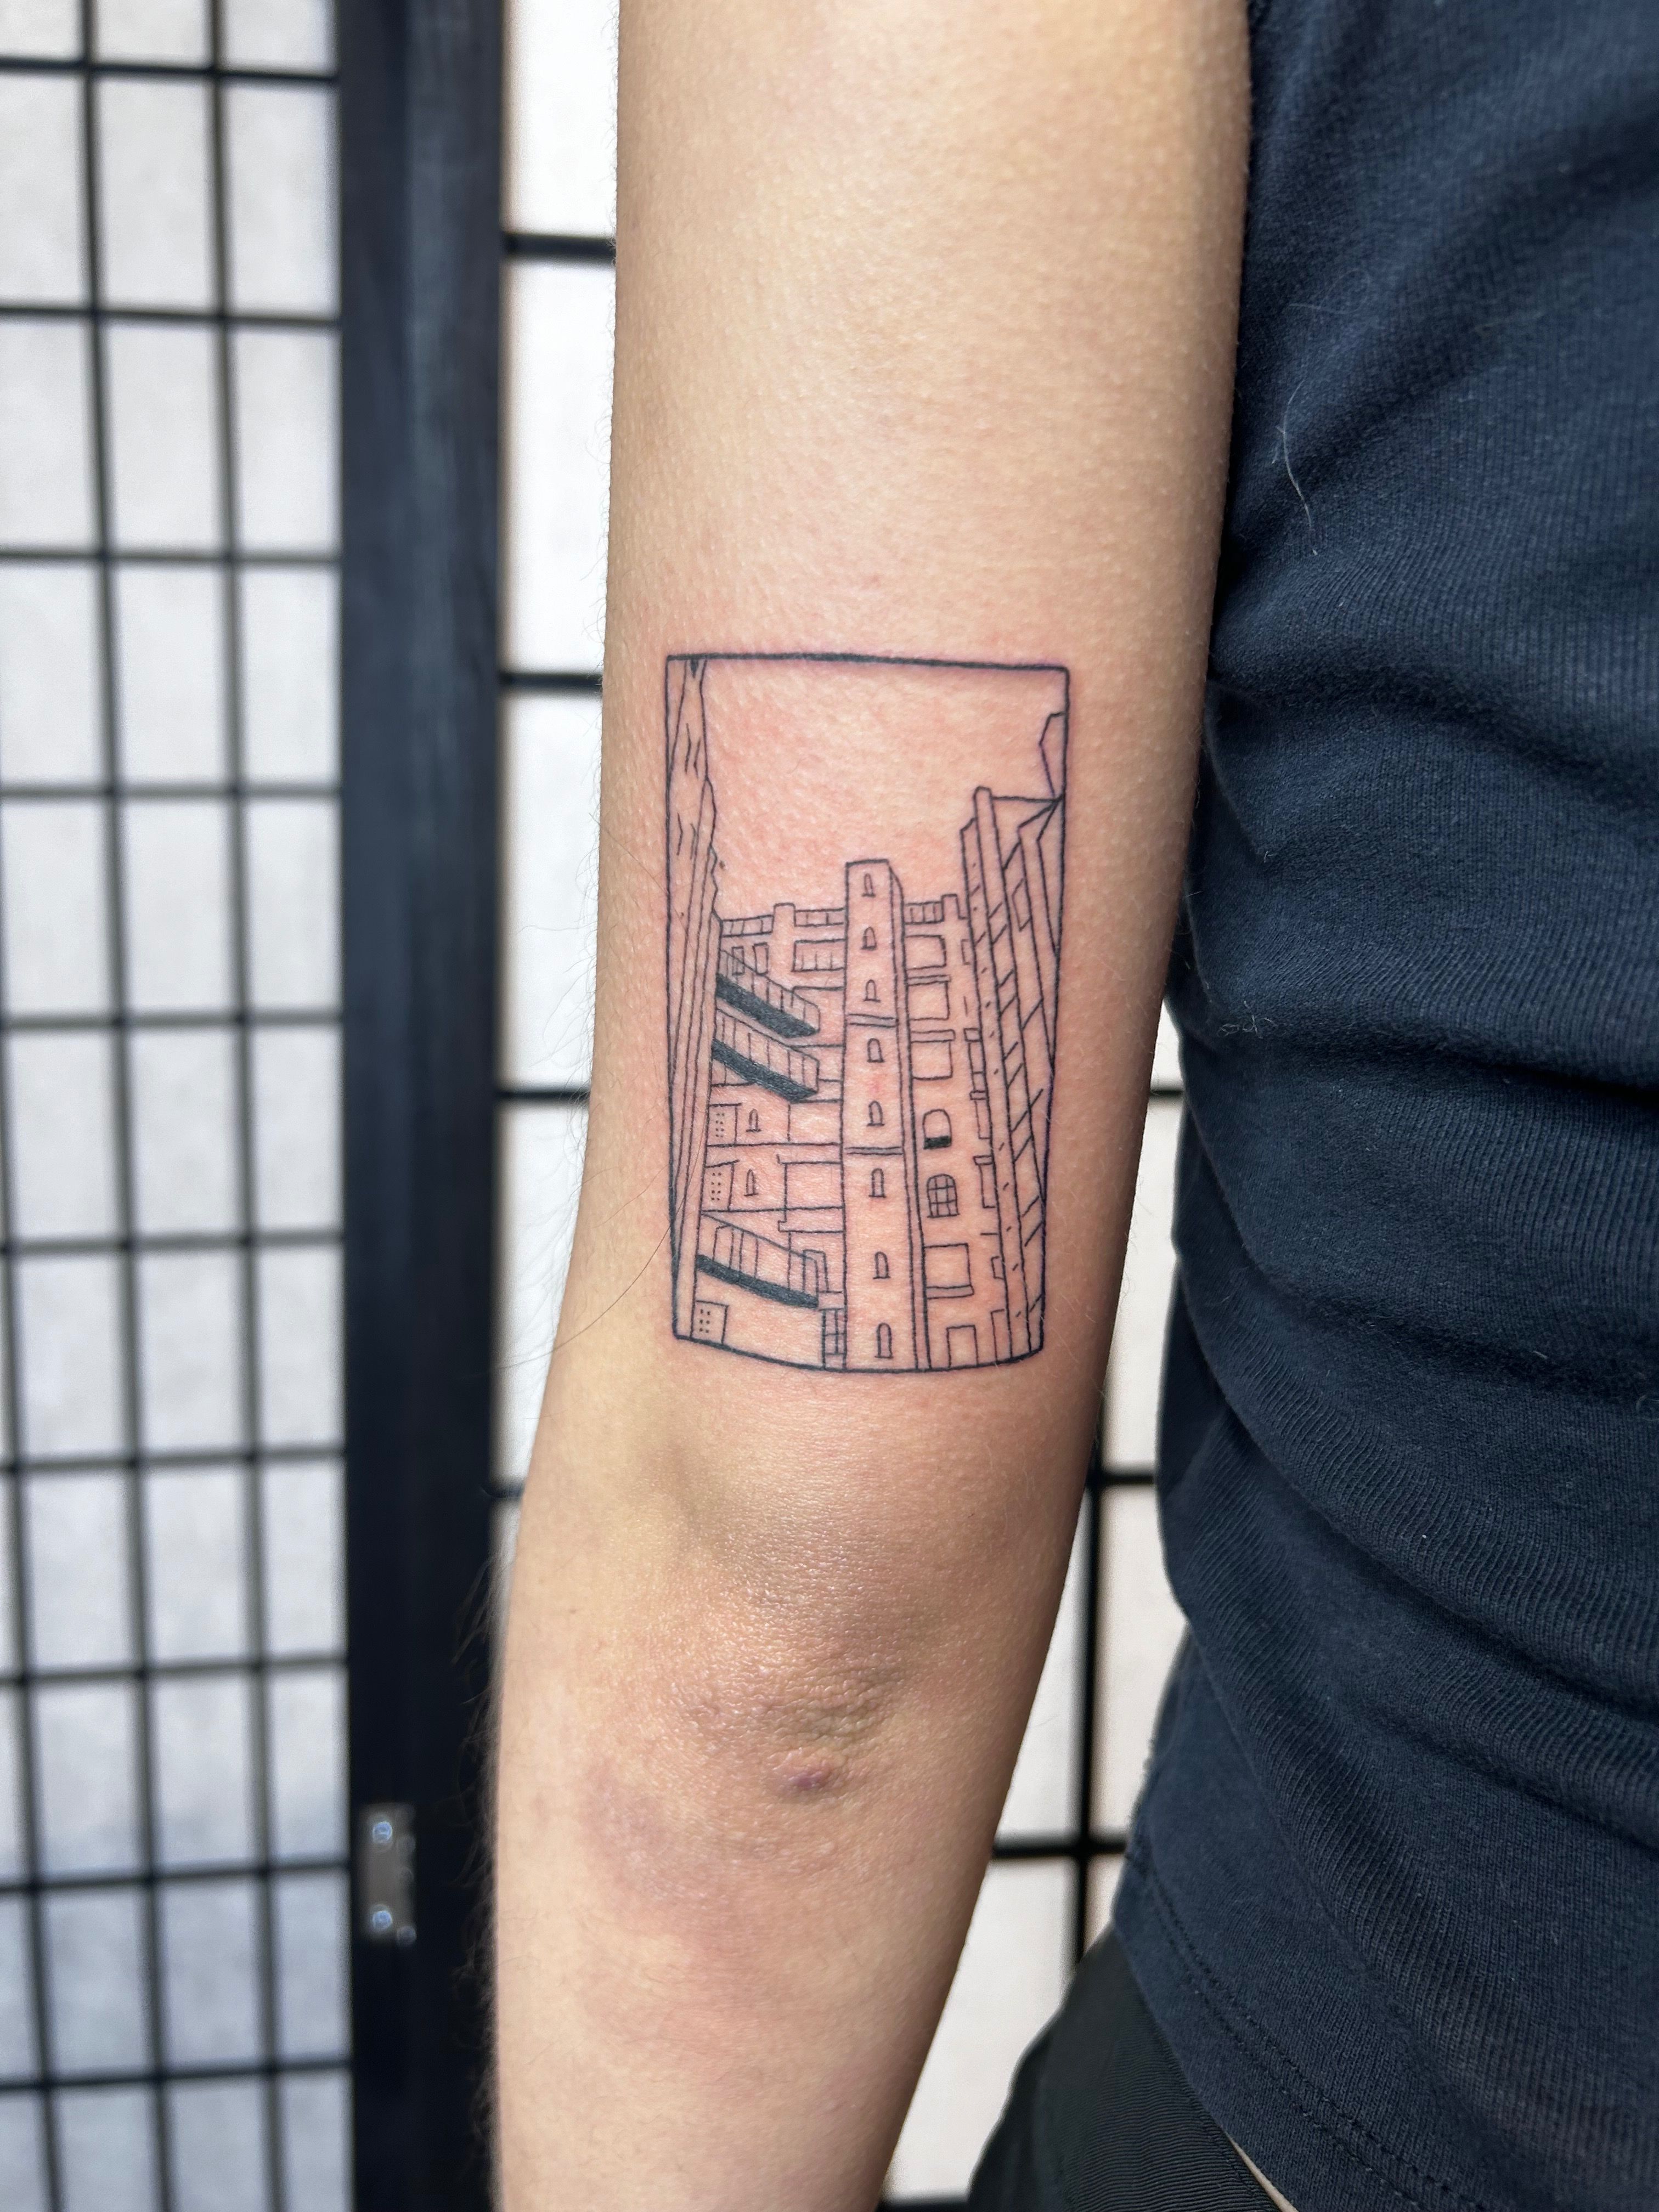 Design Stack: A Blog about Art, Design and Architecture: Embroidery Tattoo  Designs